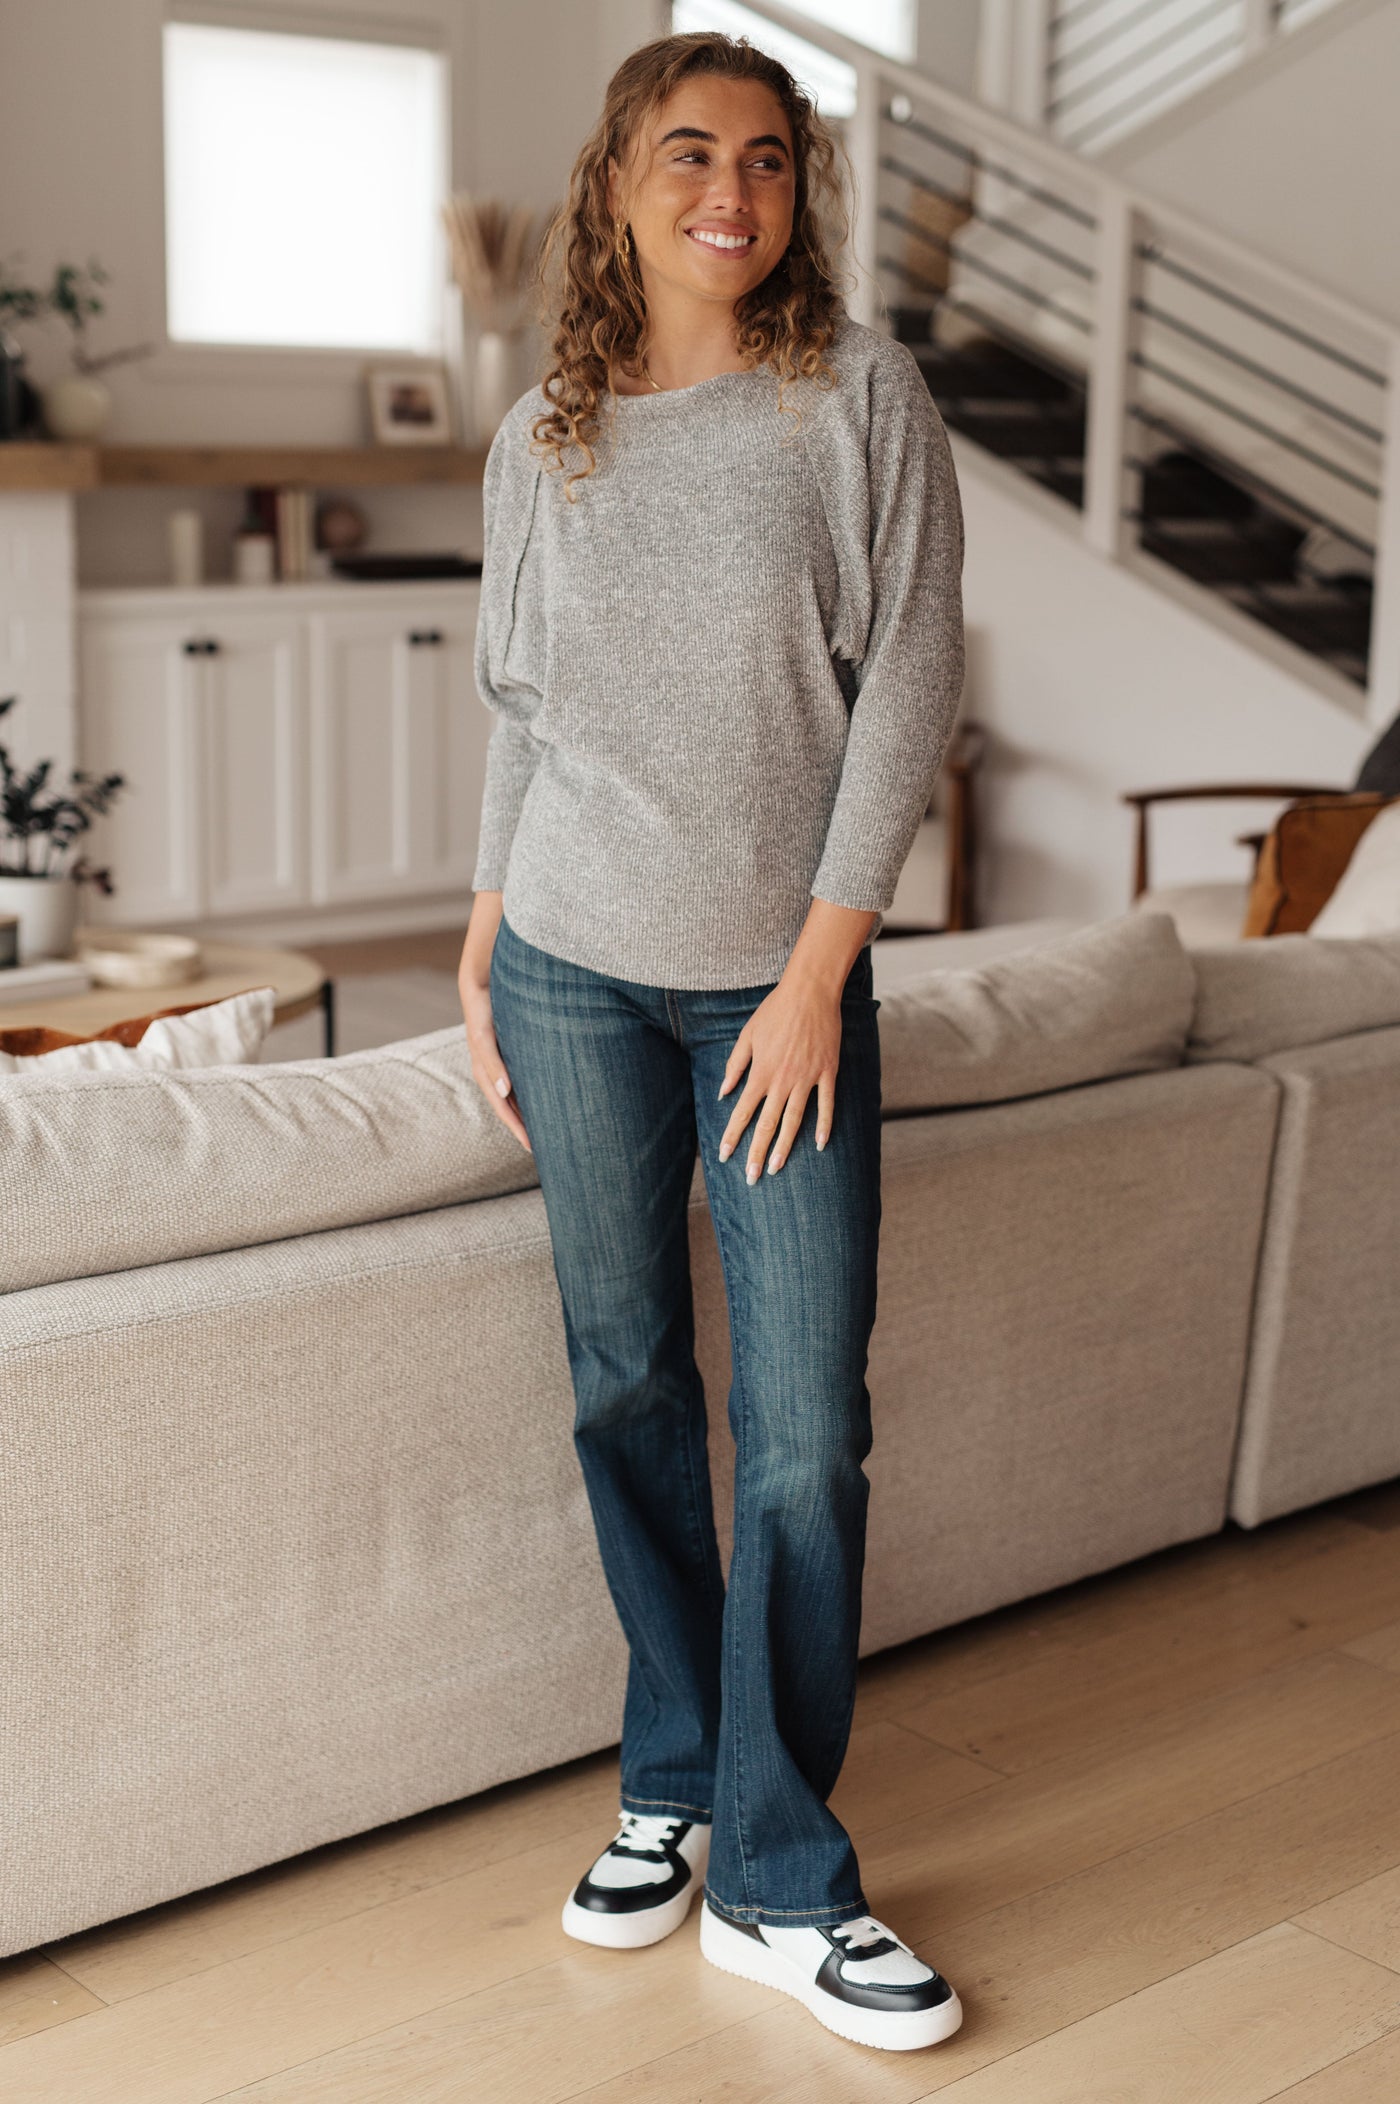 Adorable and versatile, the Stuck On You Long Sleeve Top is perfect for any occasion